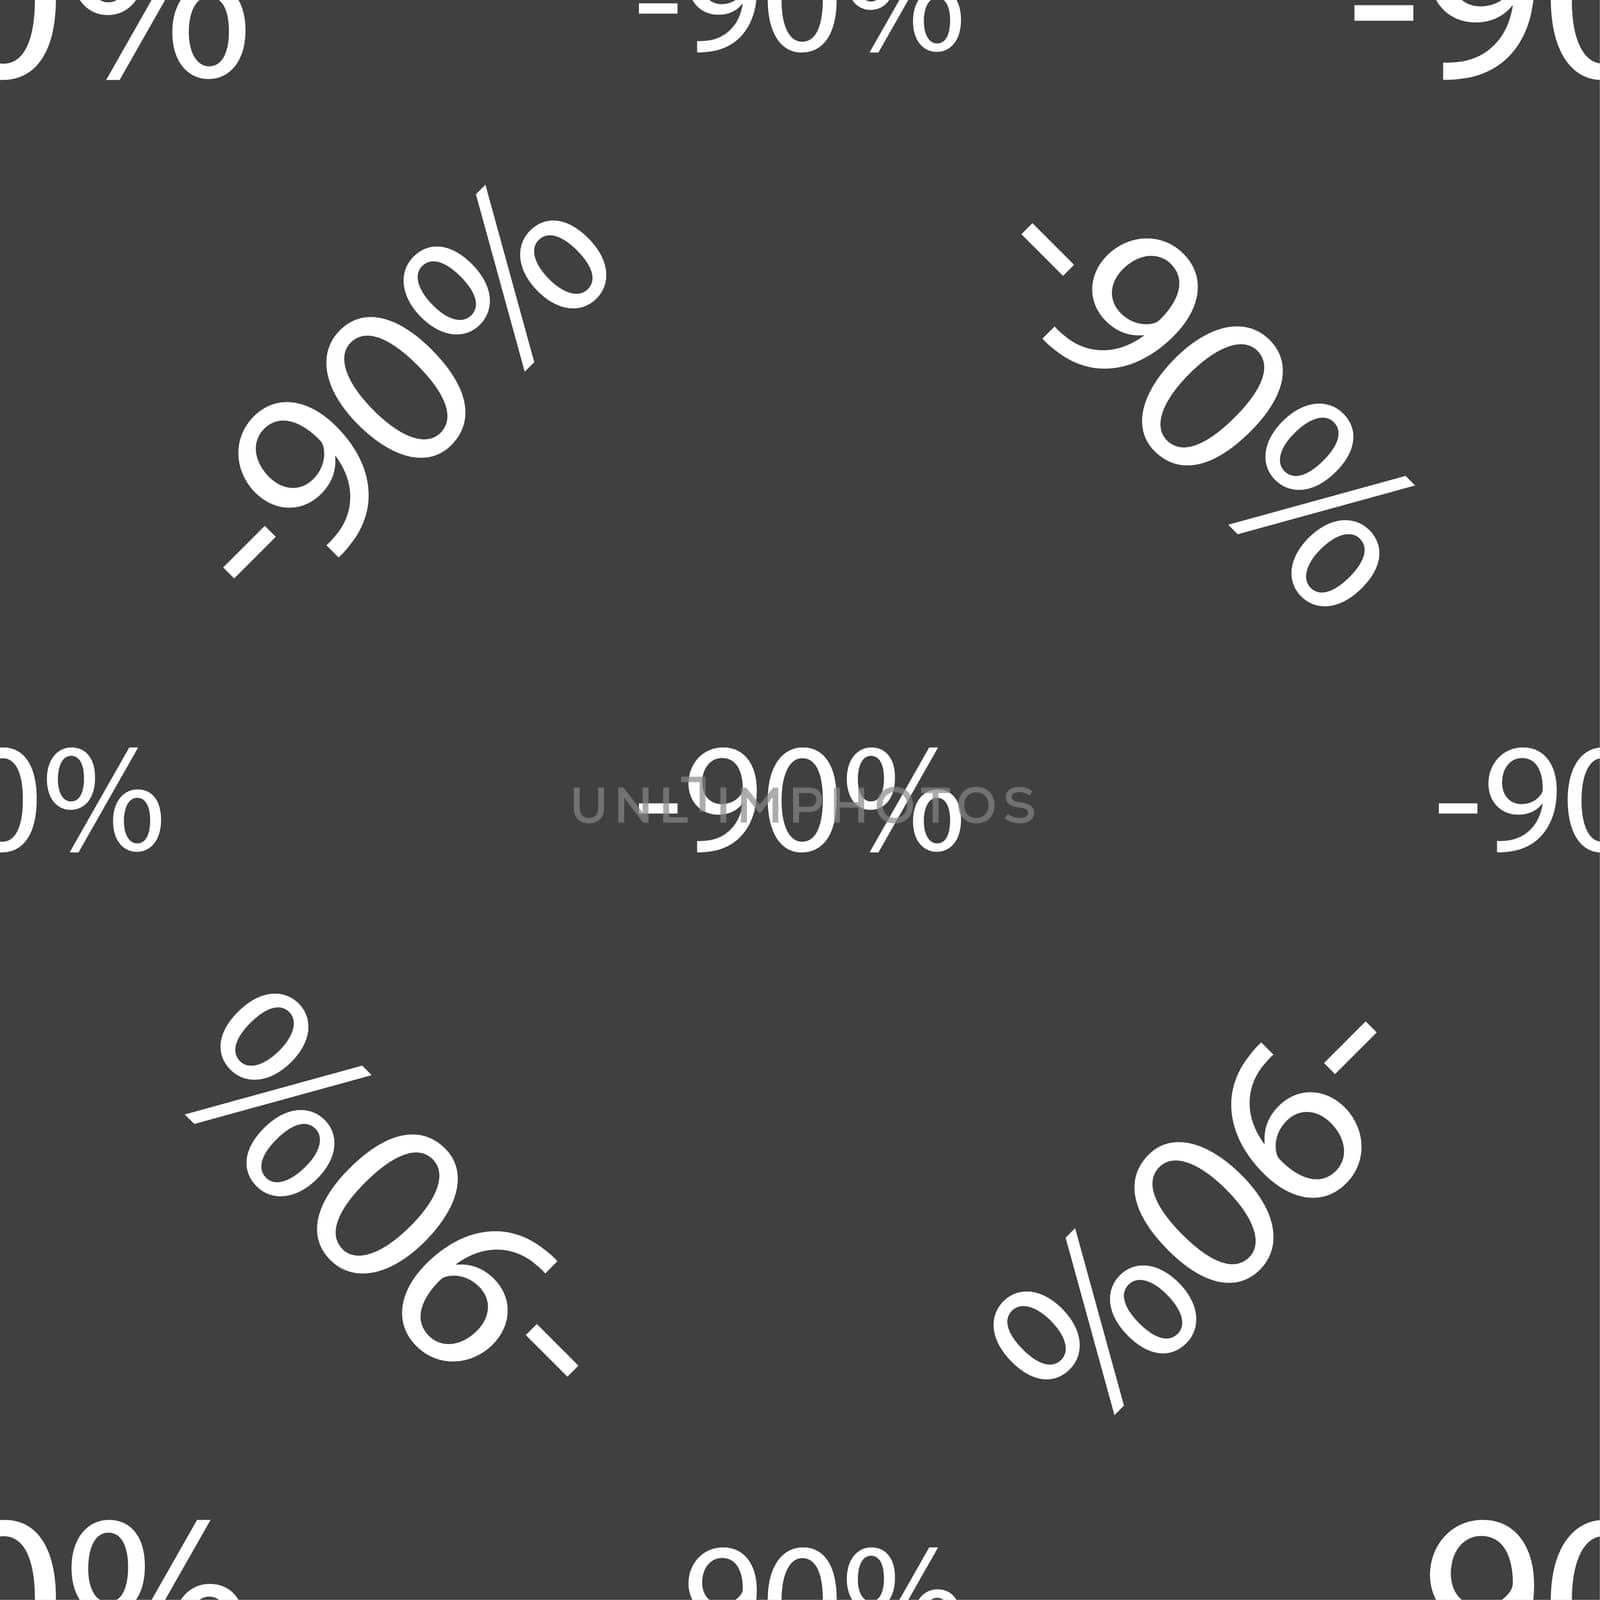 90 percent discount sign icon. Sale symbol. Special offer label. Seamless pattern on a gray background. illustration